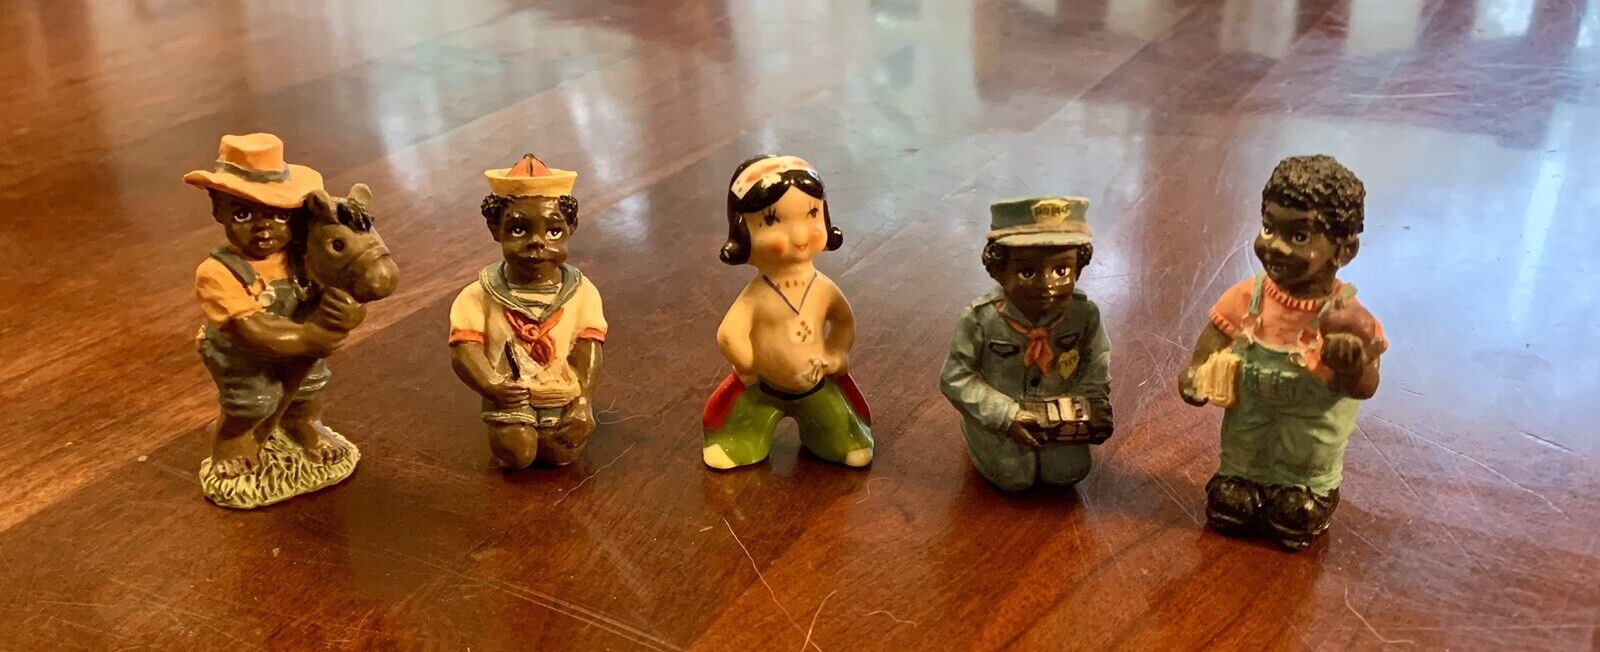 Lot Of 5: Vintage African American Boys & Native Figurines